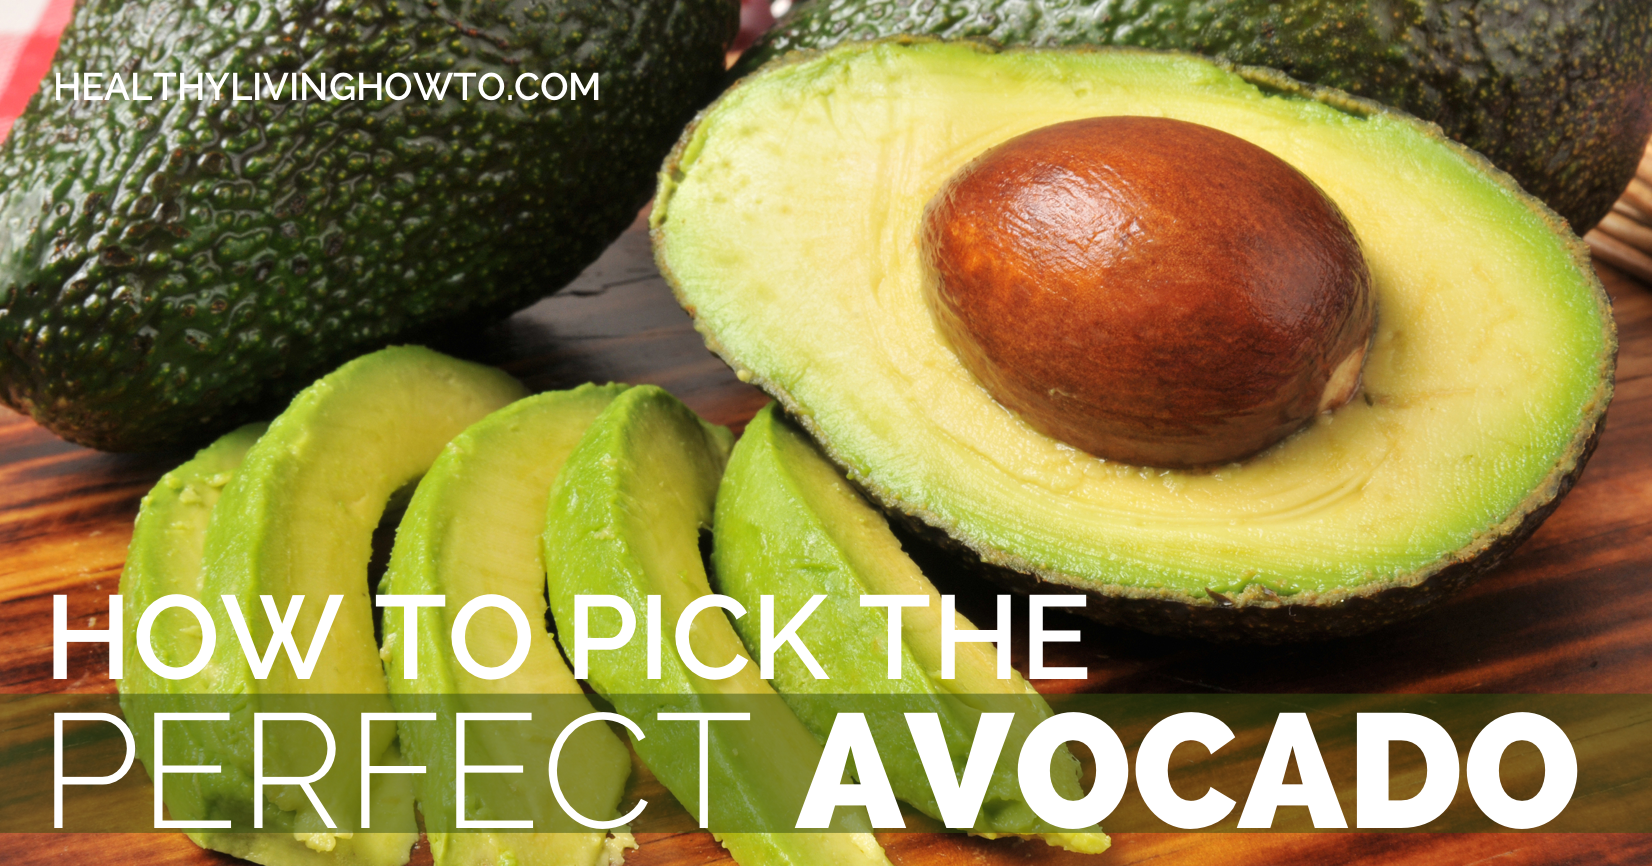 How To Pick The Perfect Avocado | healthylivinghowto.com